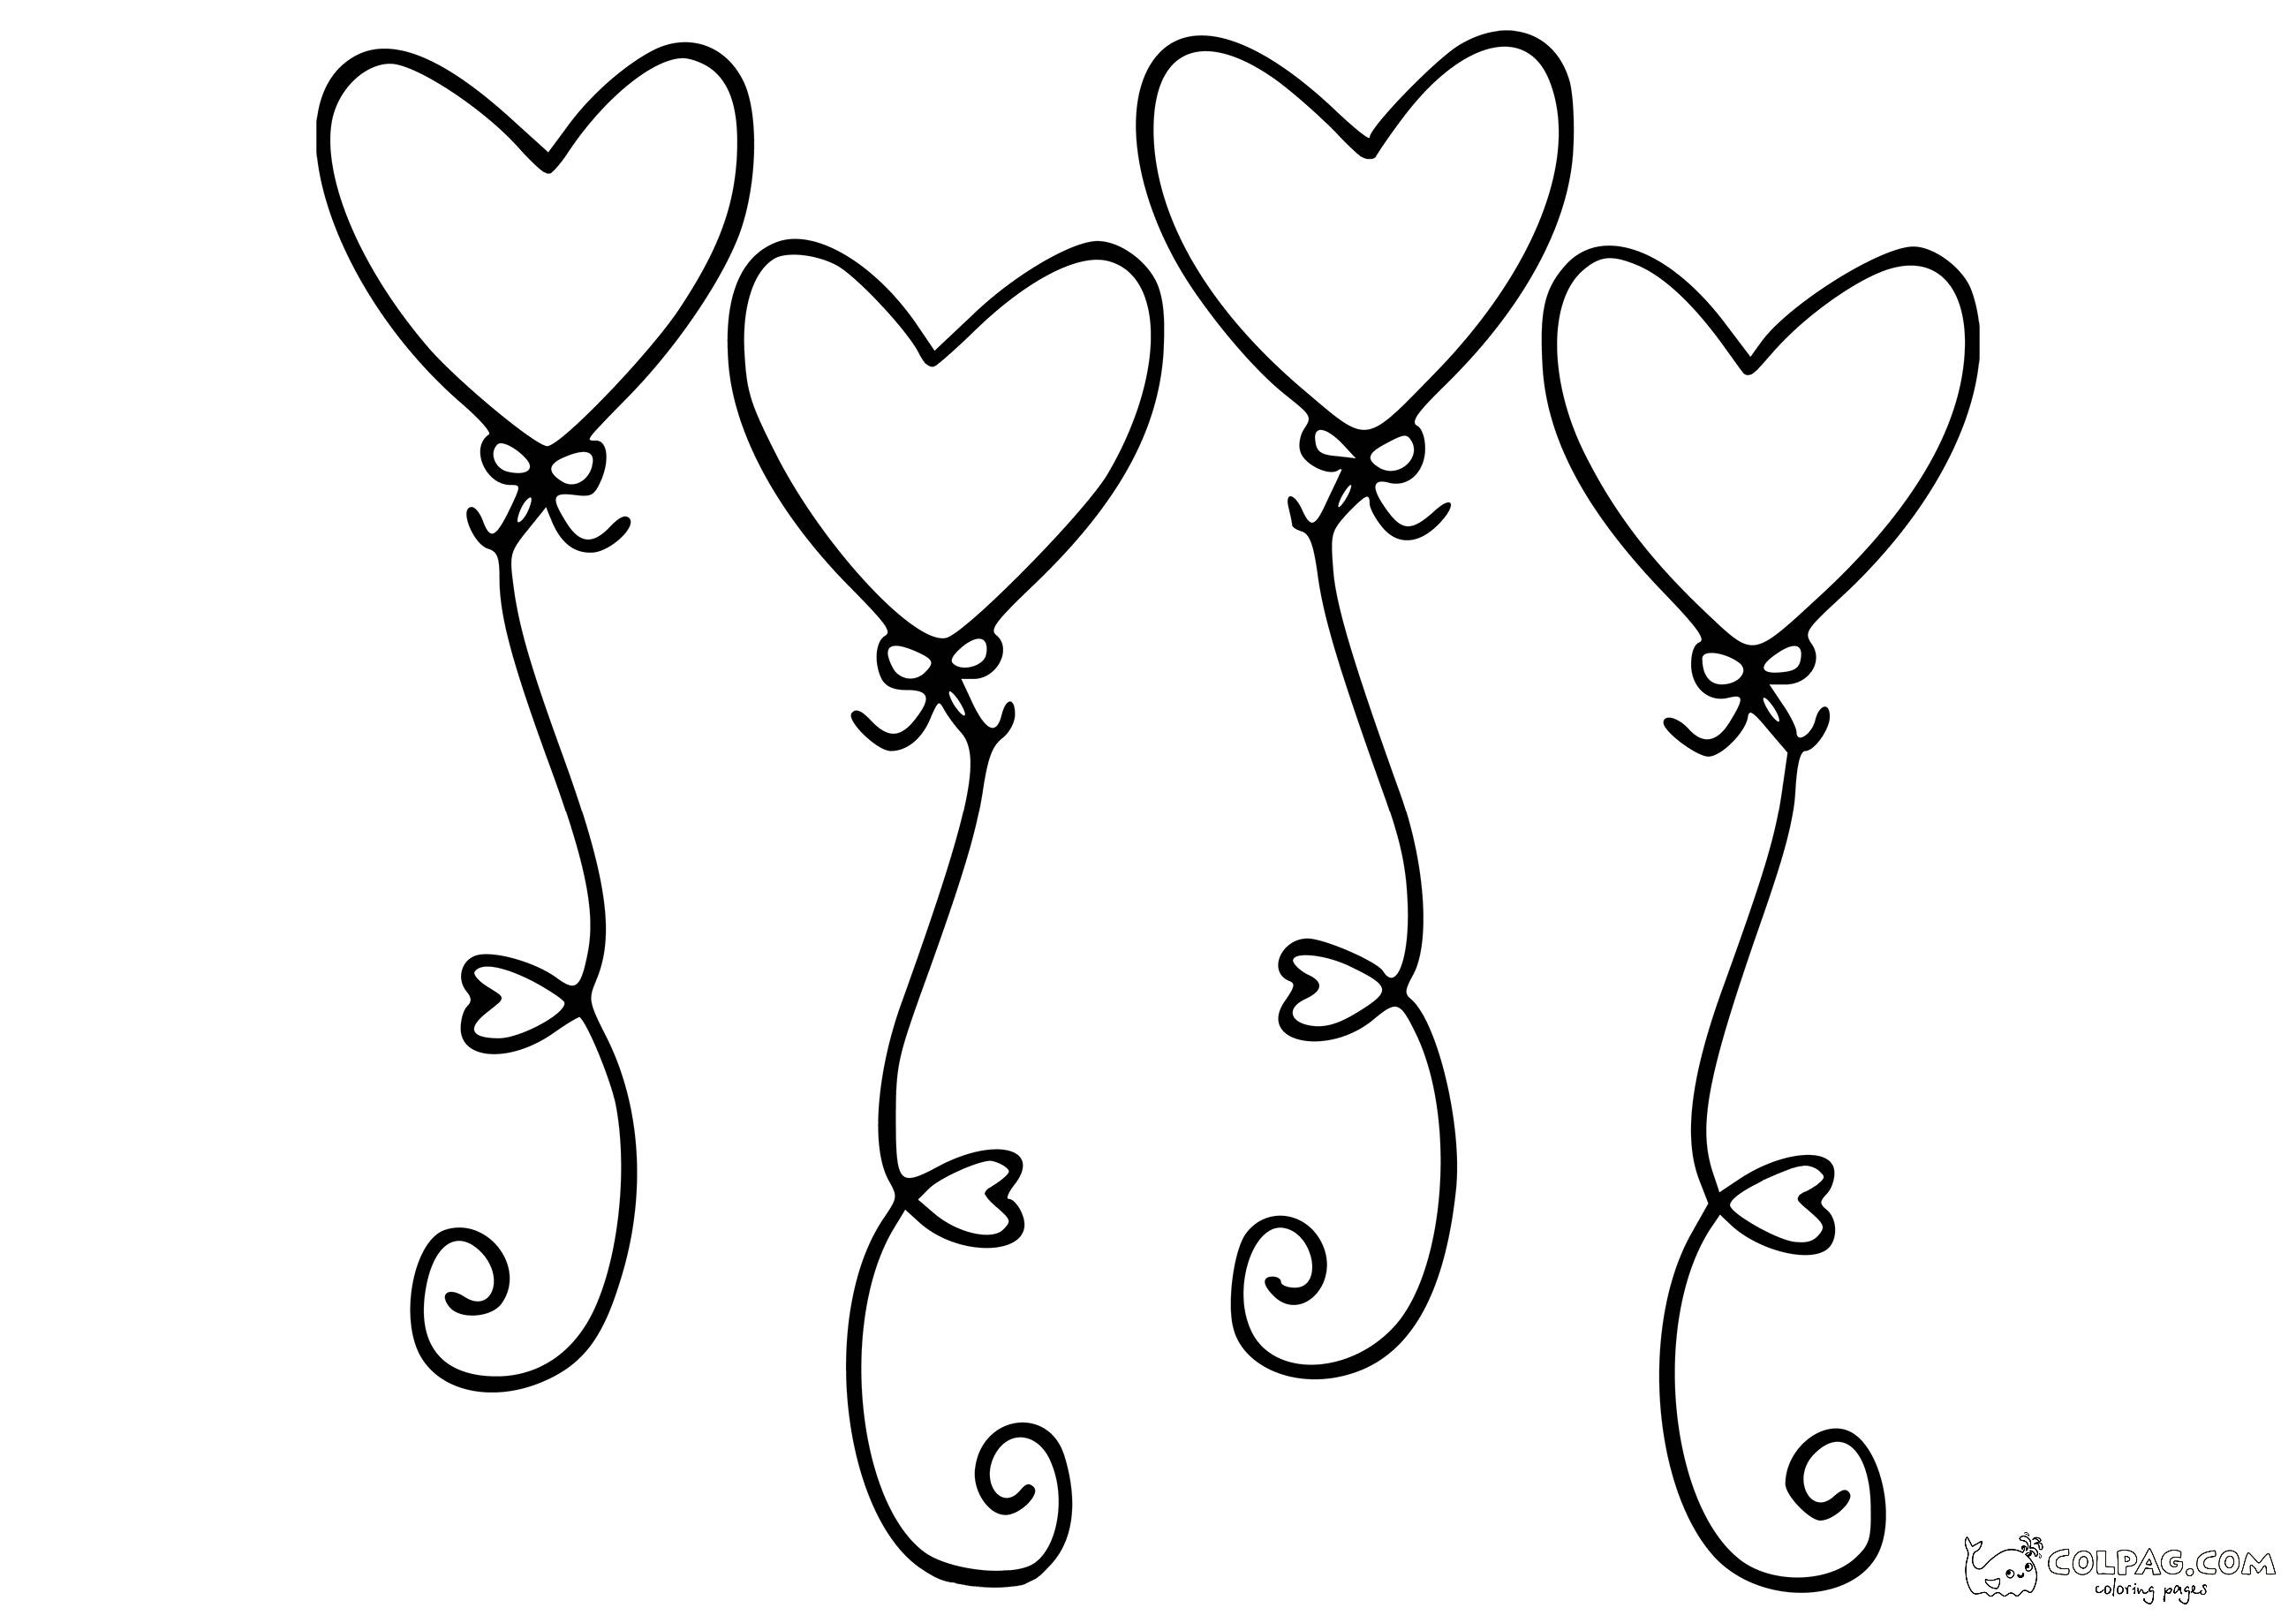 9-heart-shaped-baloons-coloring-page-colpag-9